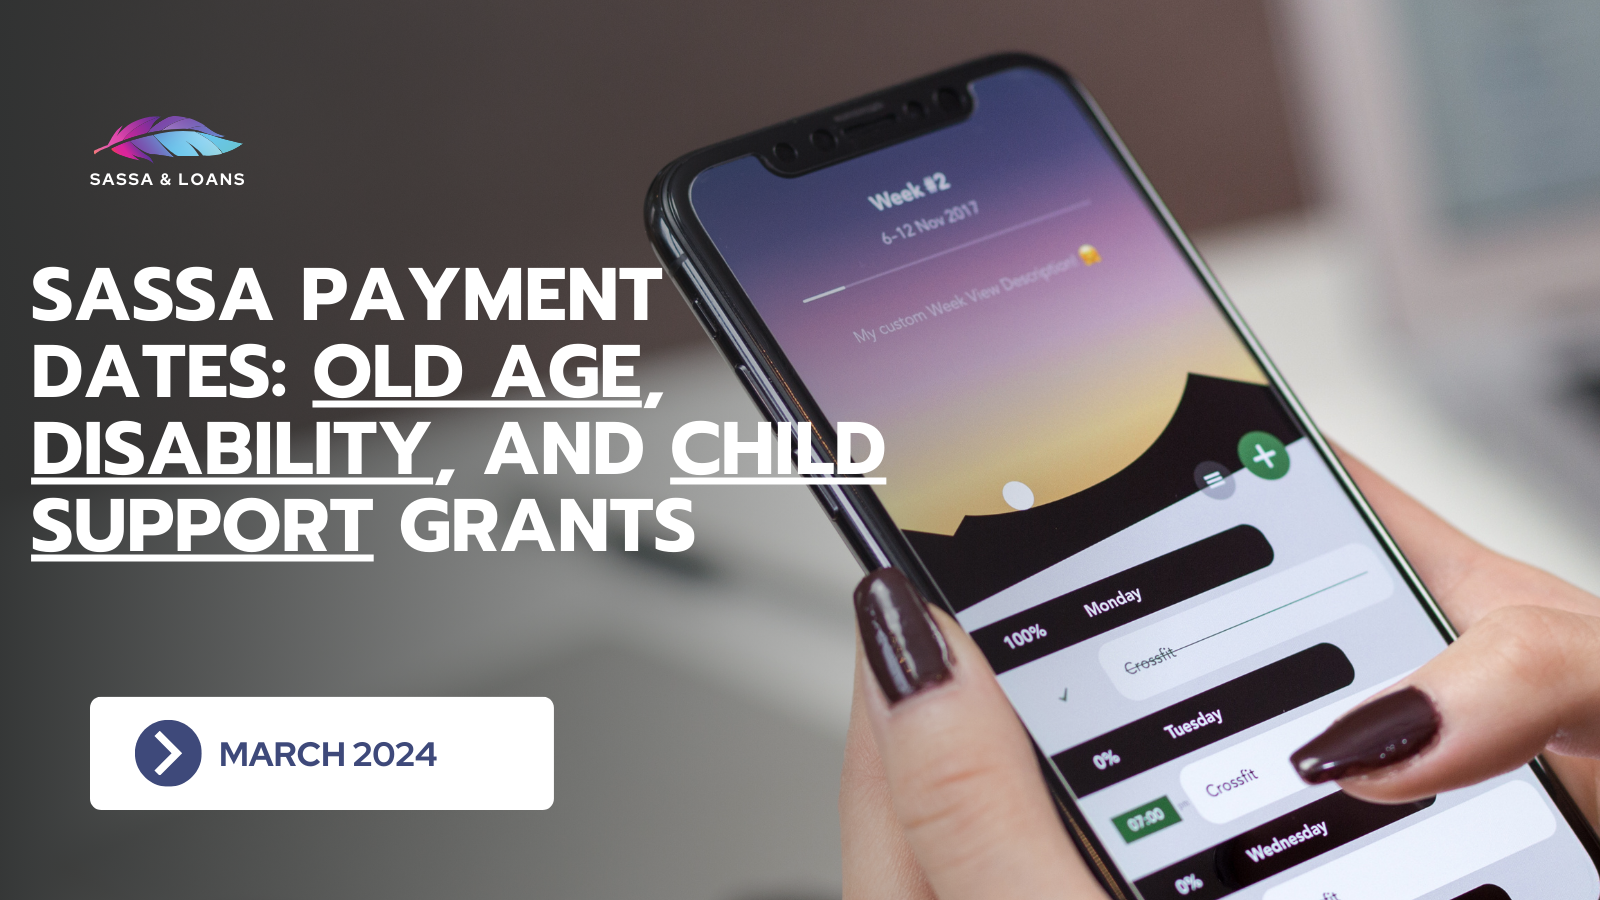 SASSA Payment Dates Old Age, Disability, and Child Support Grants